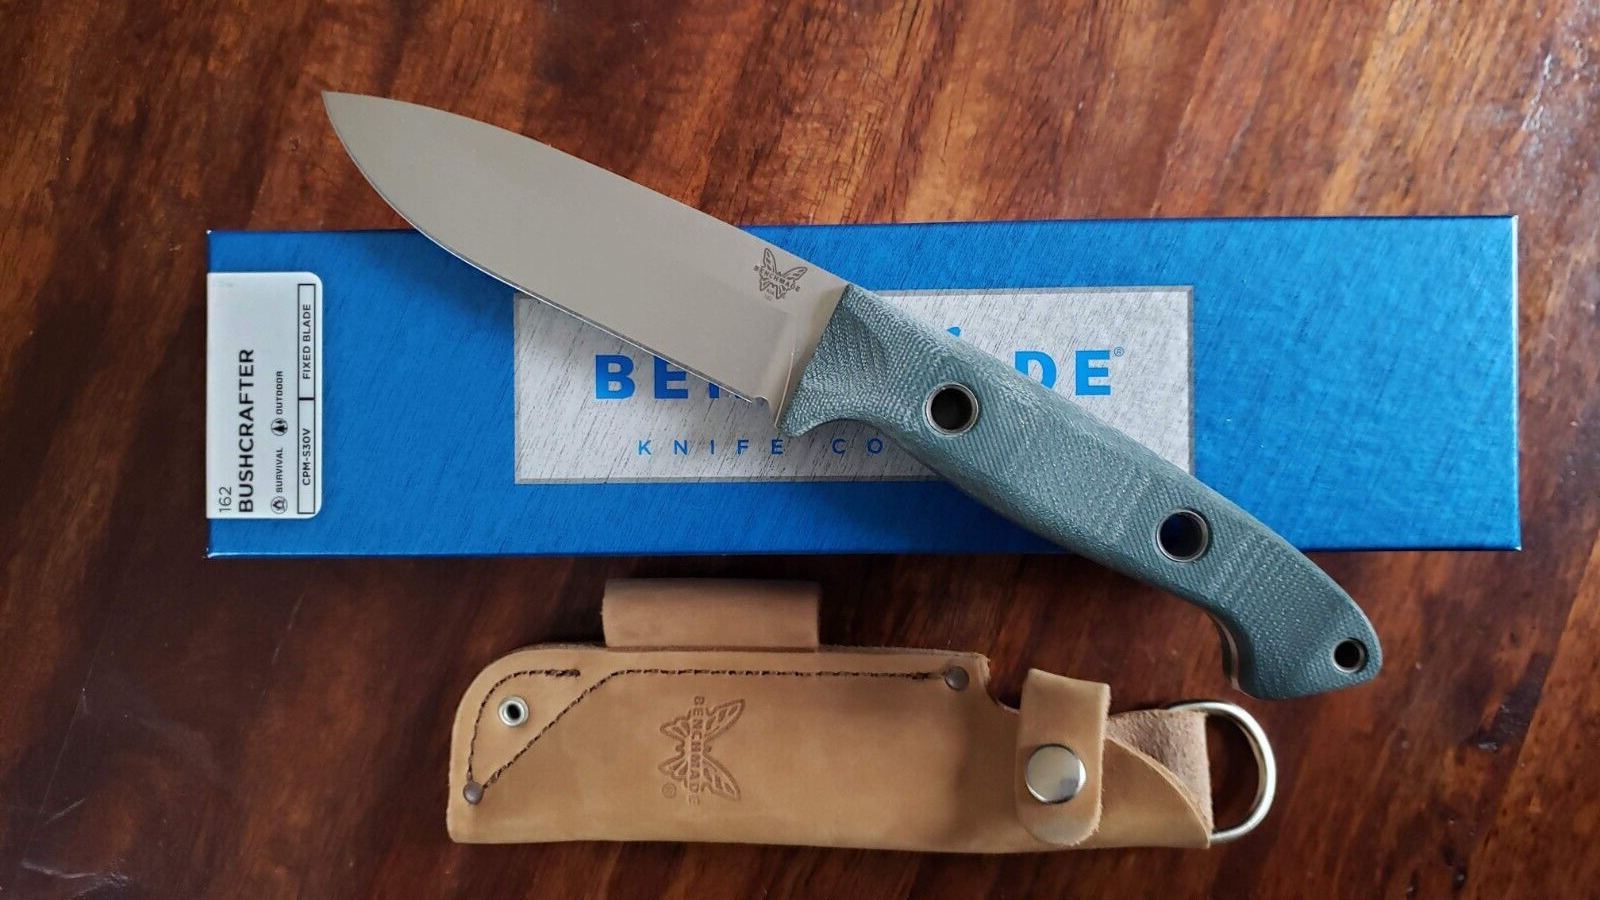 Benchmade BUSHCRAFTER 162 Fixed Blade Knife CPM-S30V Stainless Green & Red G10